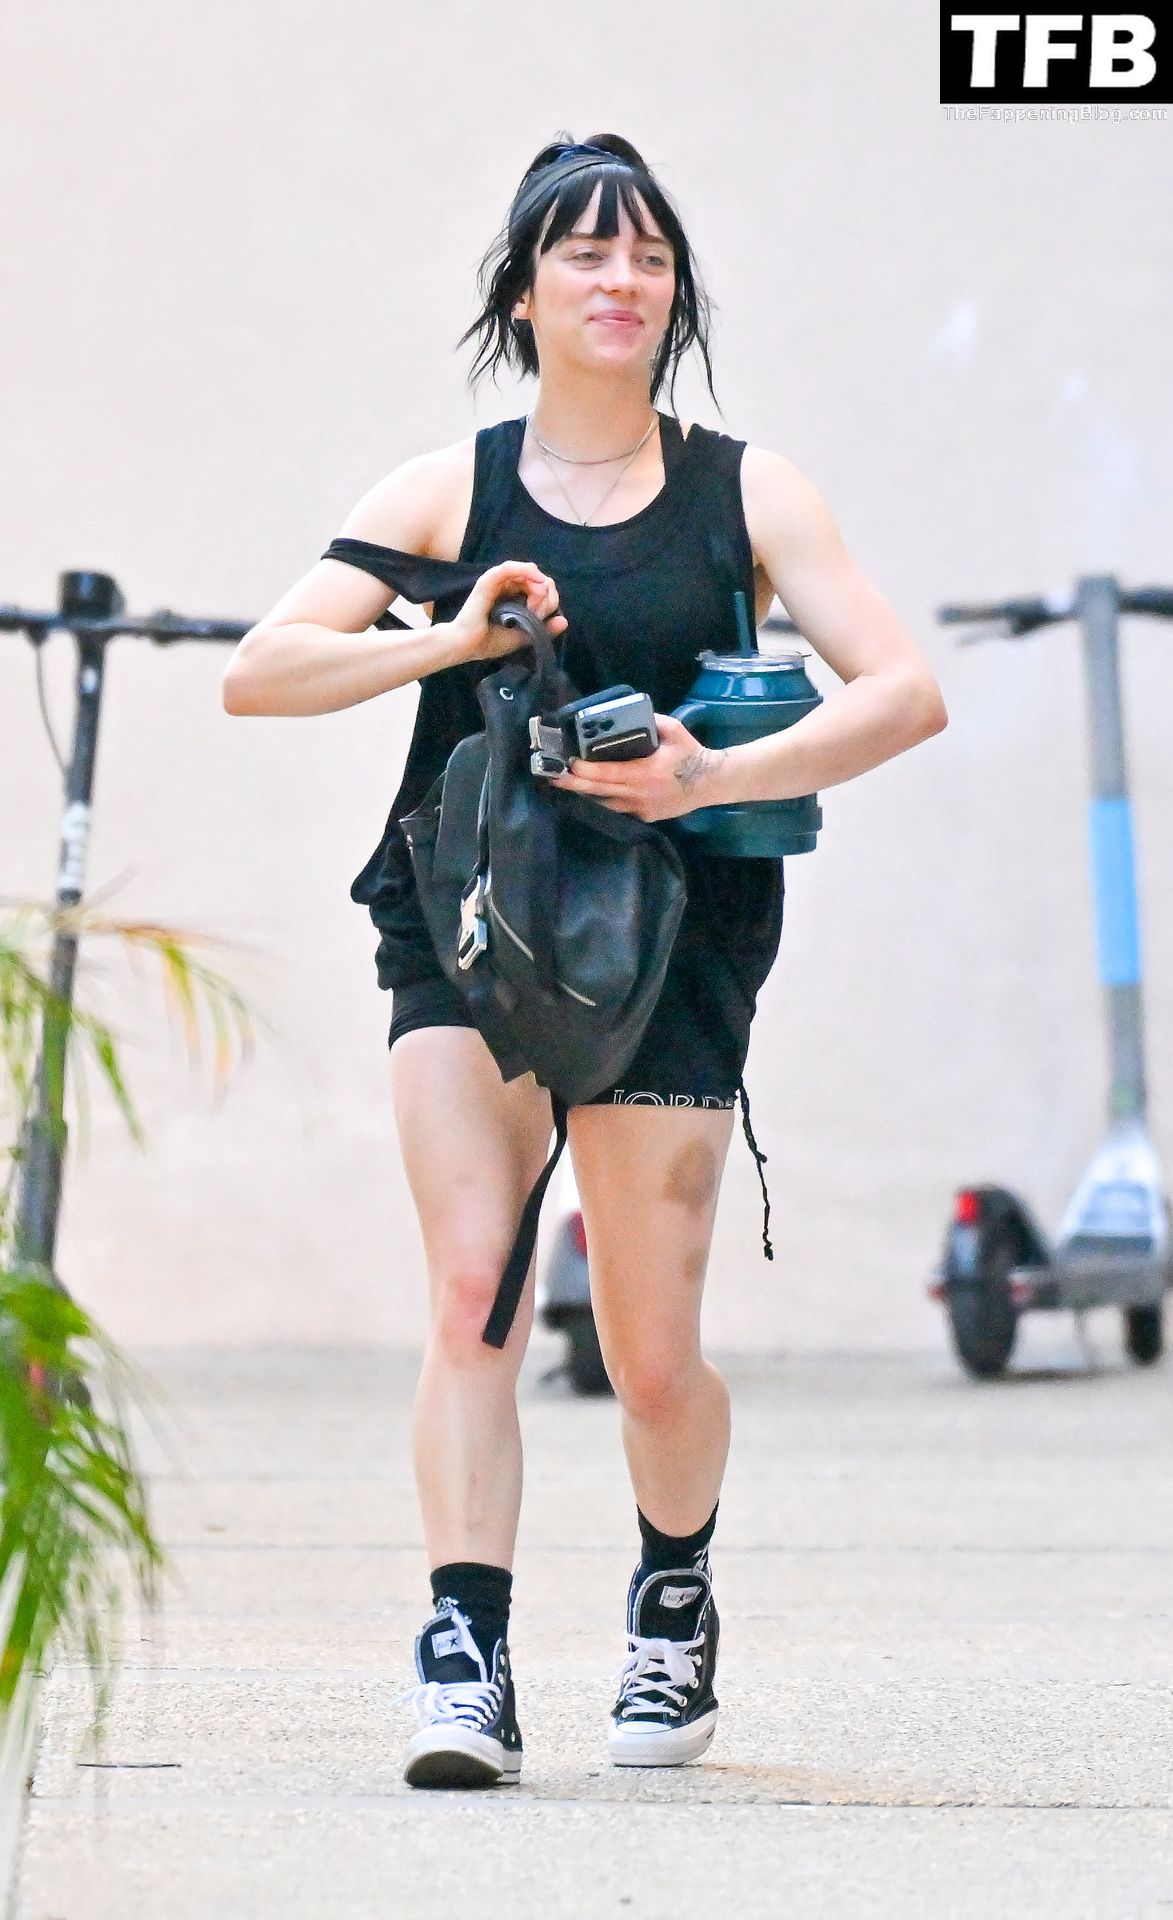 Billie Eilish Sexy The Fappening Blog 9 - Billie Eilish Keeps Up Her Fitness Regime, Stepping Out For Another Workout in Studio City (26 Photos)